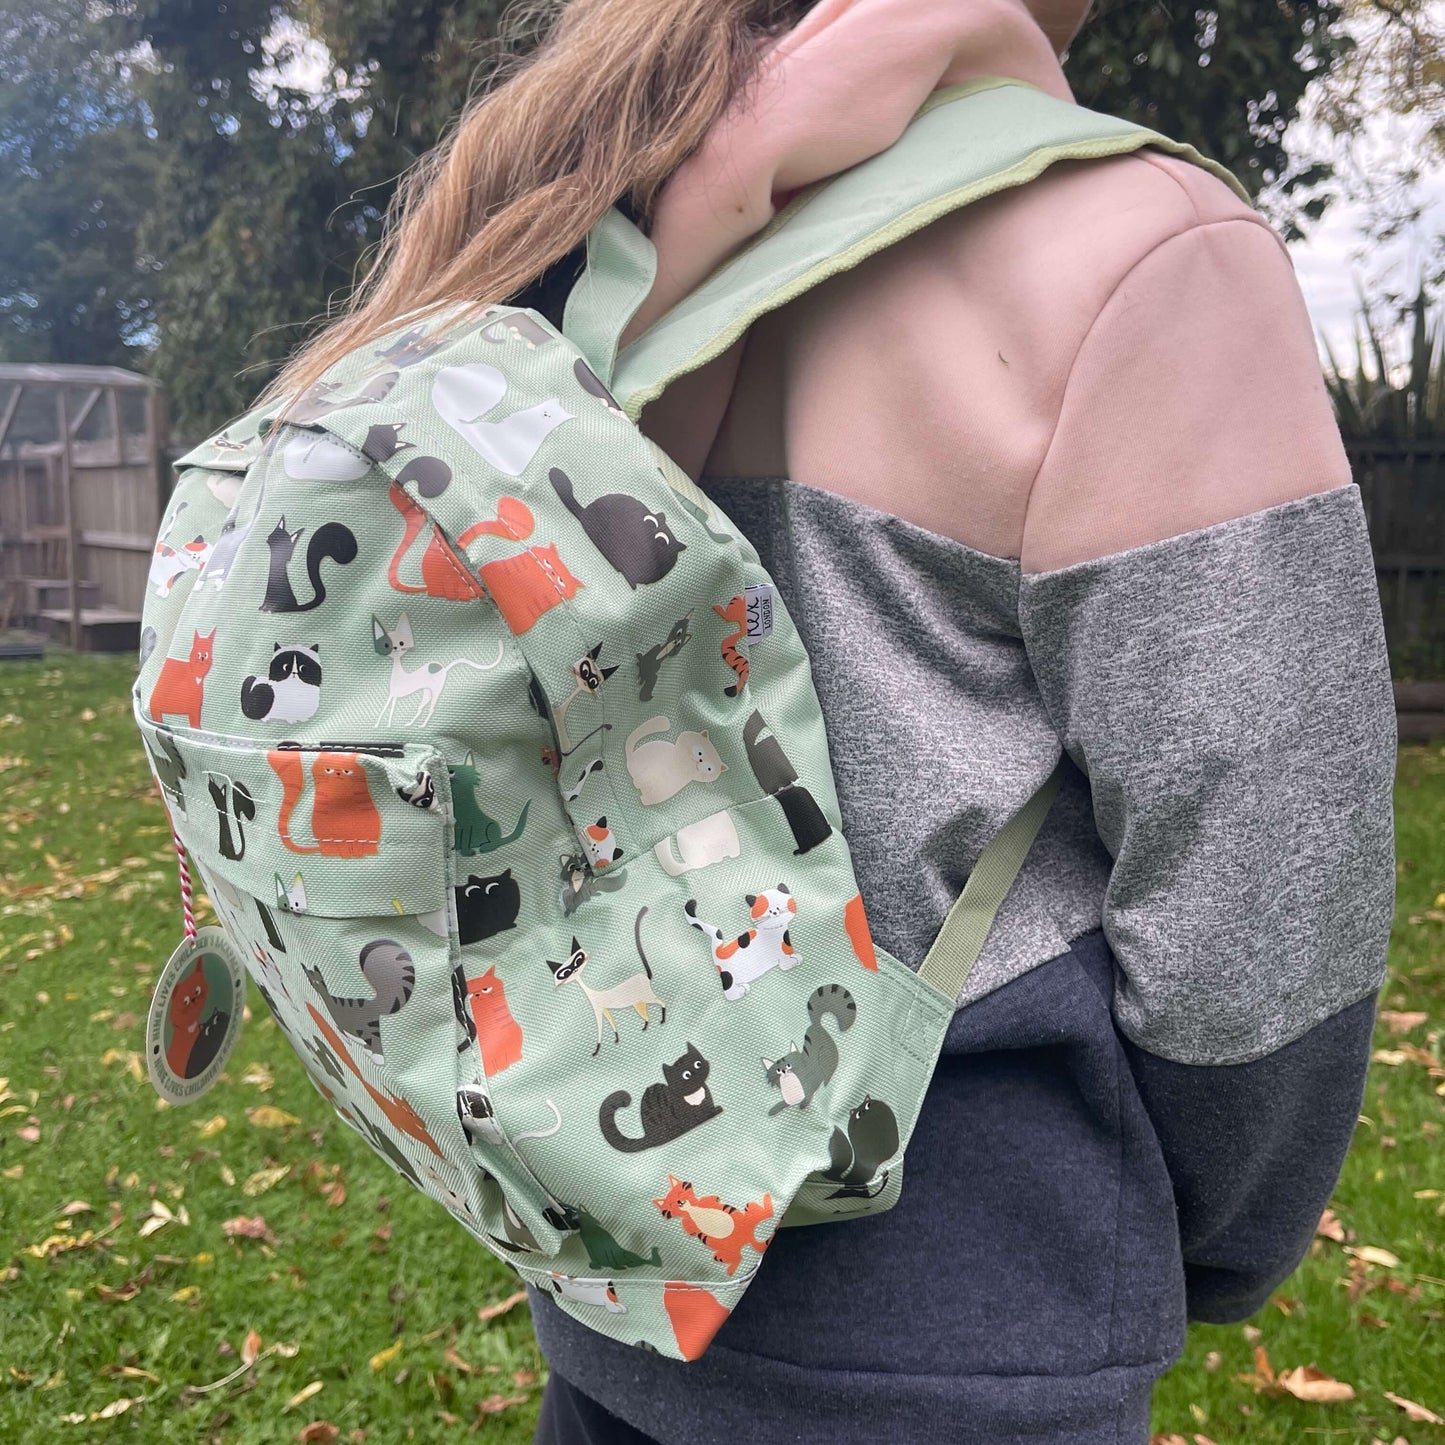 Girl wearing a mint green backpack with assorted coloured cats printed on it.